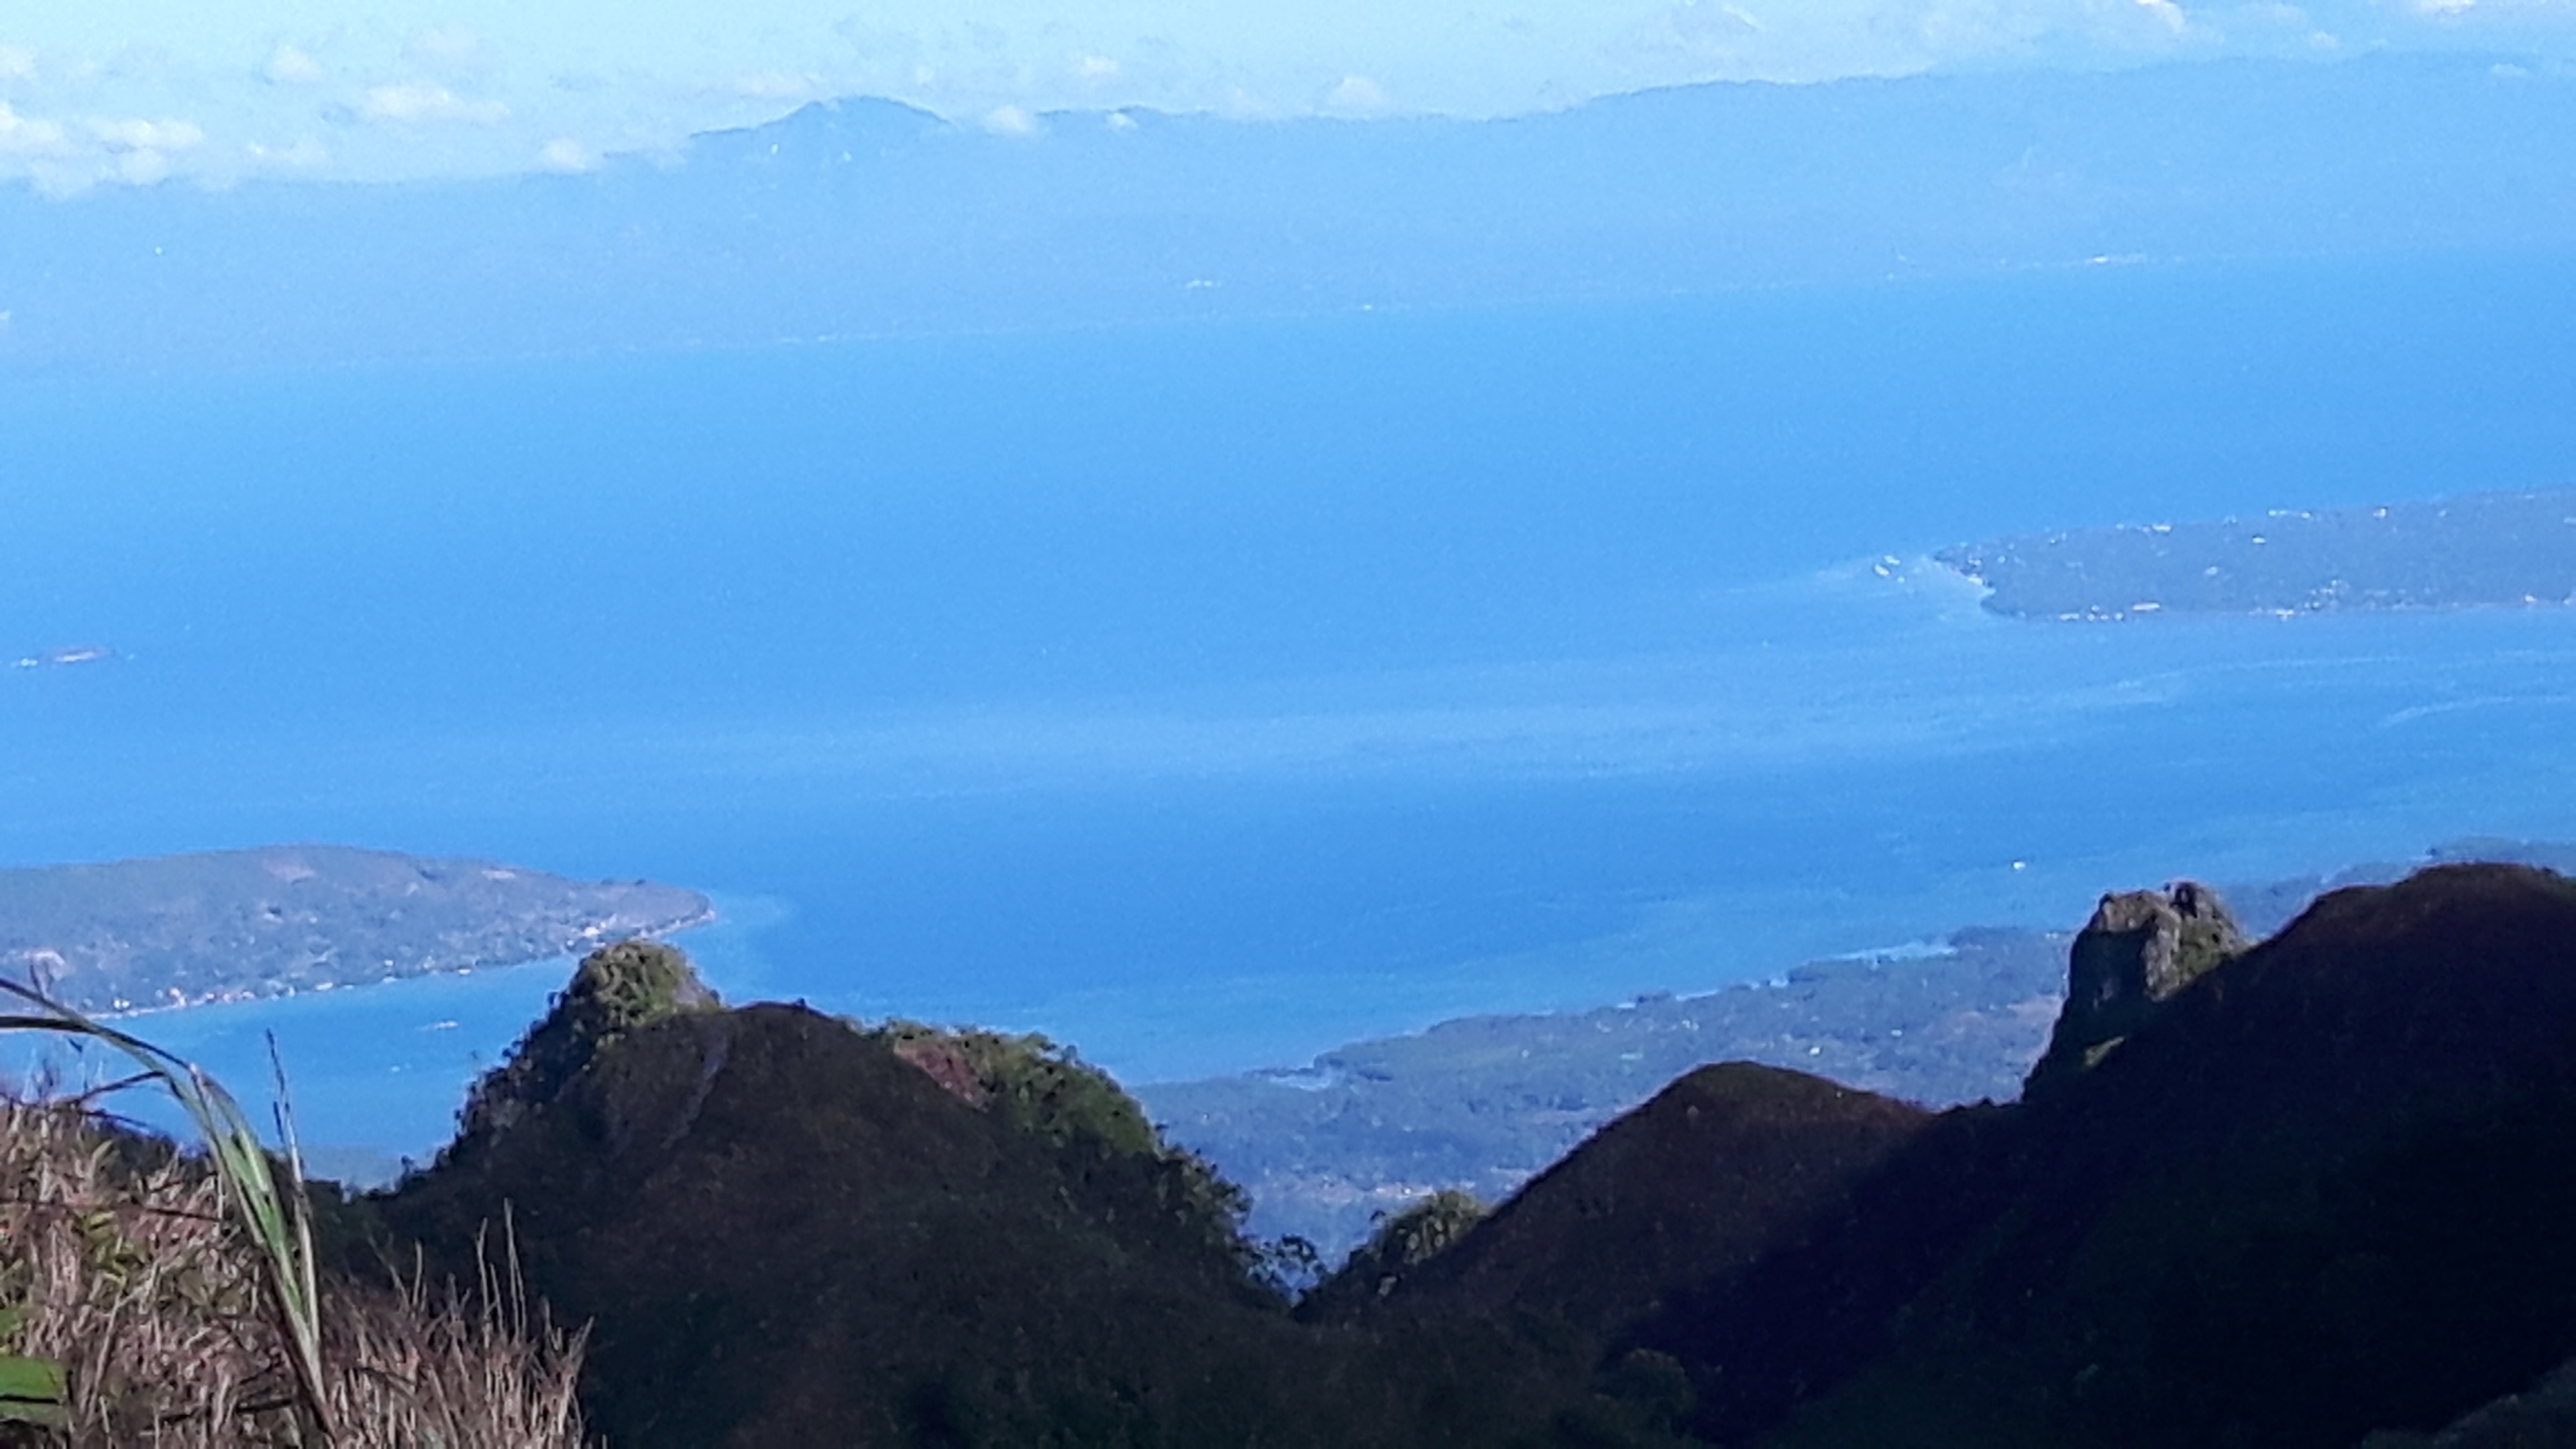 View from the summit of Mount Osmena...best to climb first thing in the morning and use of a guide is recommended..mid to difficult depending on your condition..well  worth the time and energy spent!
